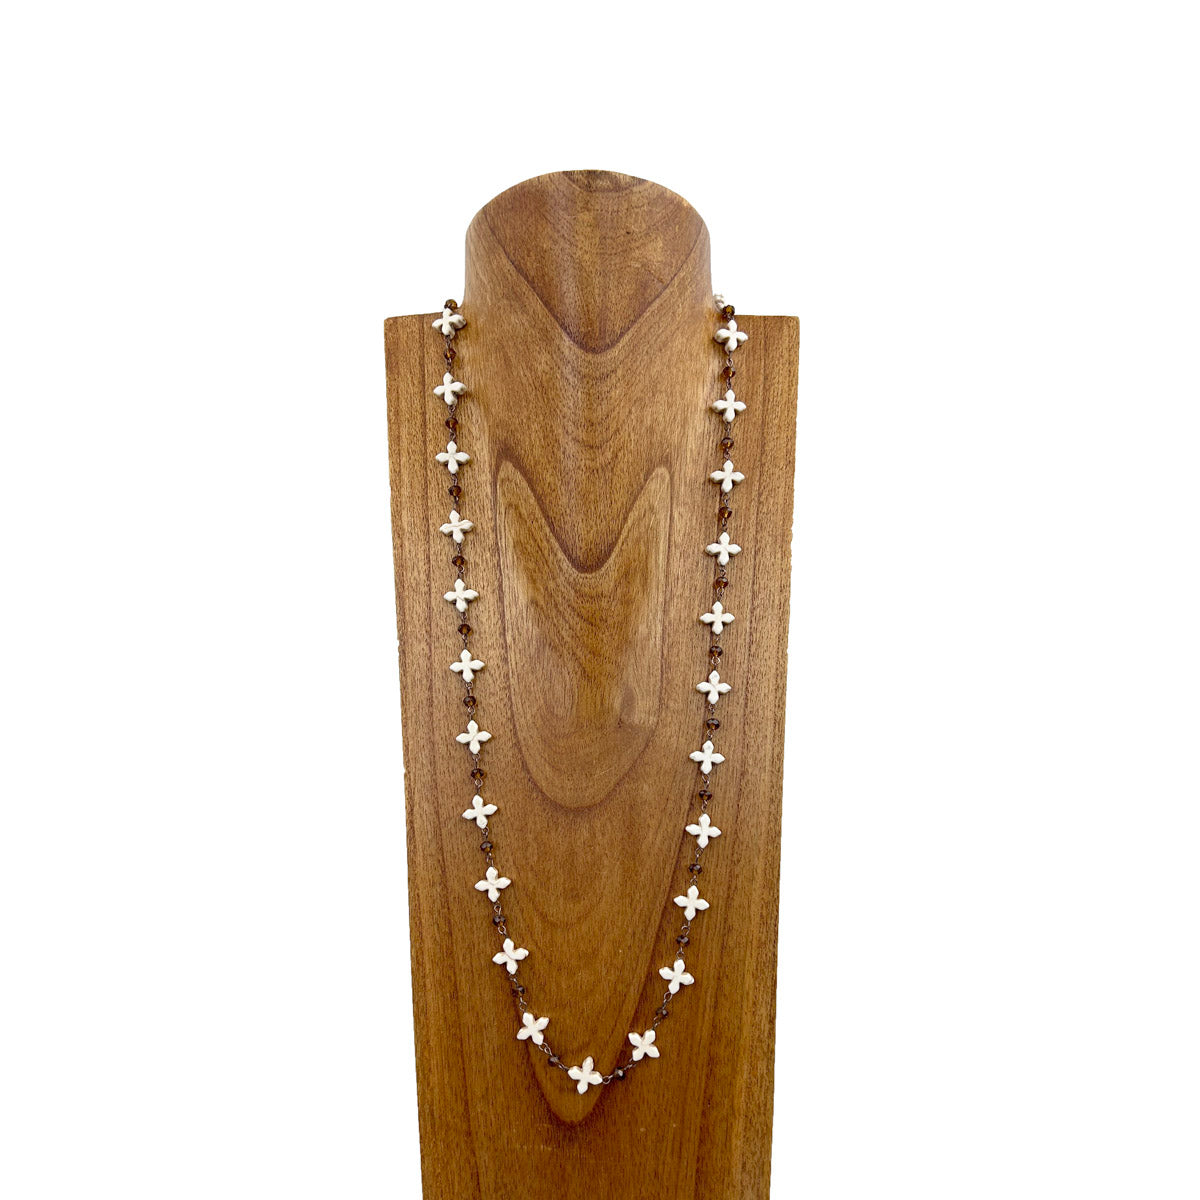 NKS230702-06	" 32 inches Small white long cross and brown crystal with  copper metal chain Necklace"